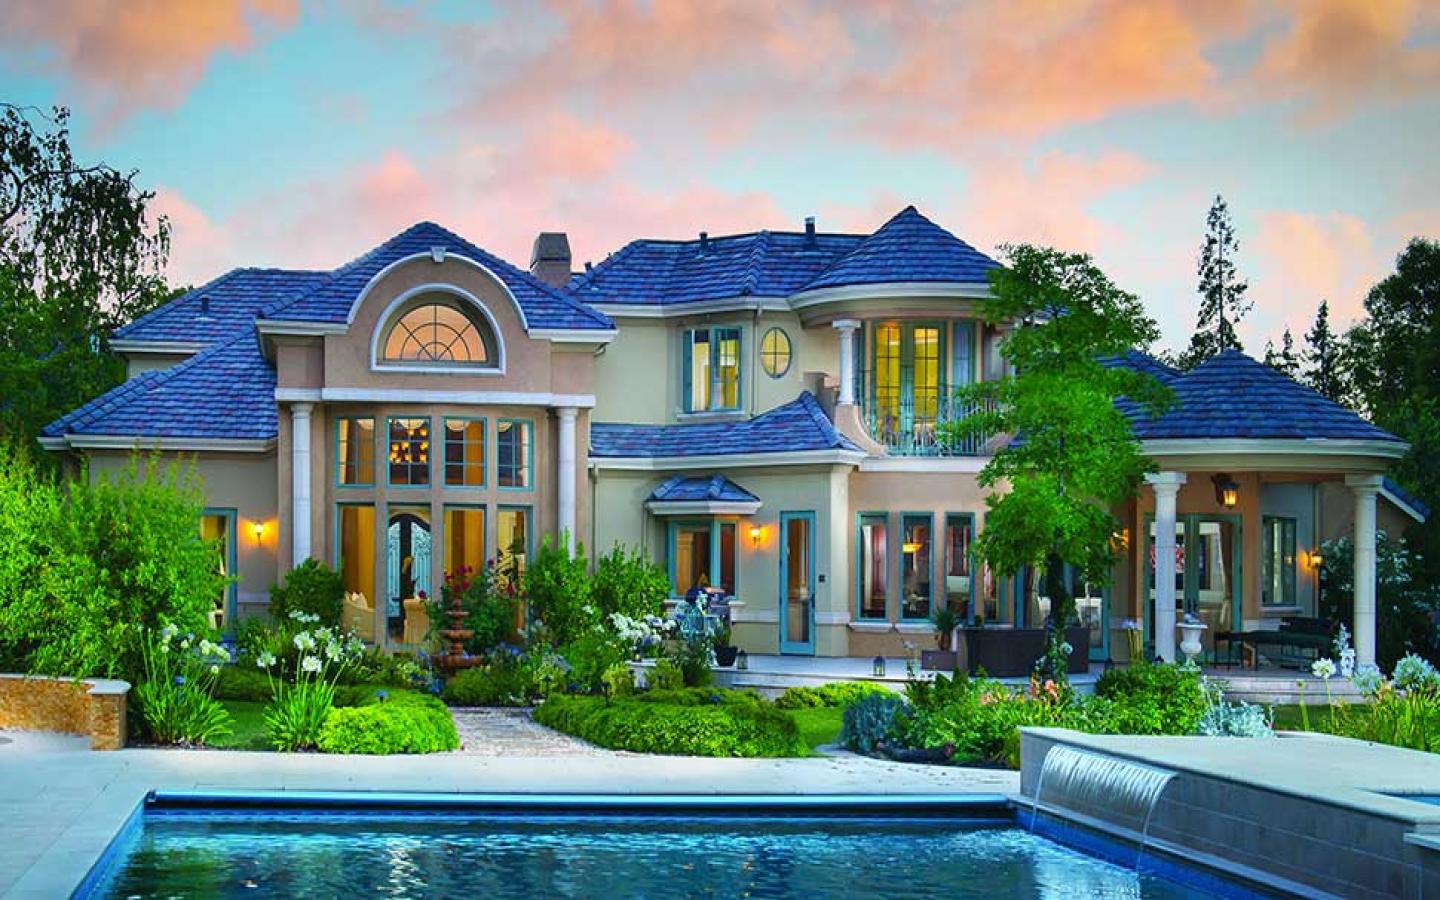 Dream House Wallpapers - Top Free Dream House Backgrounds - WallpaperAccess